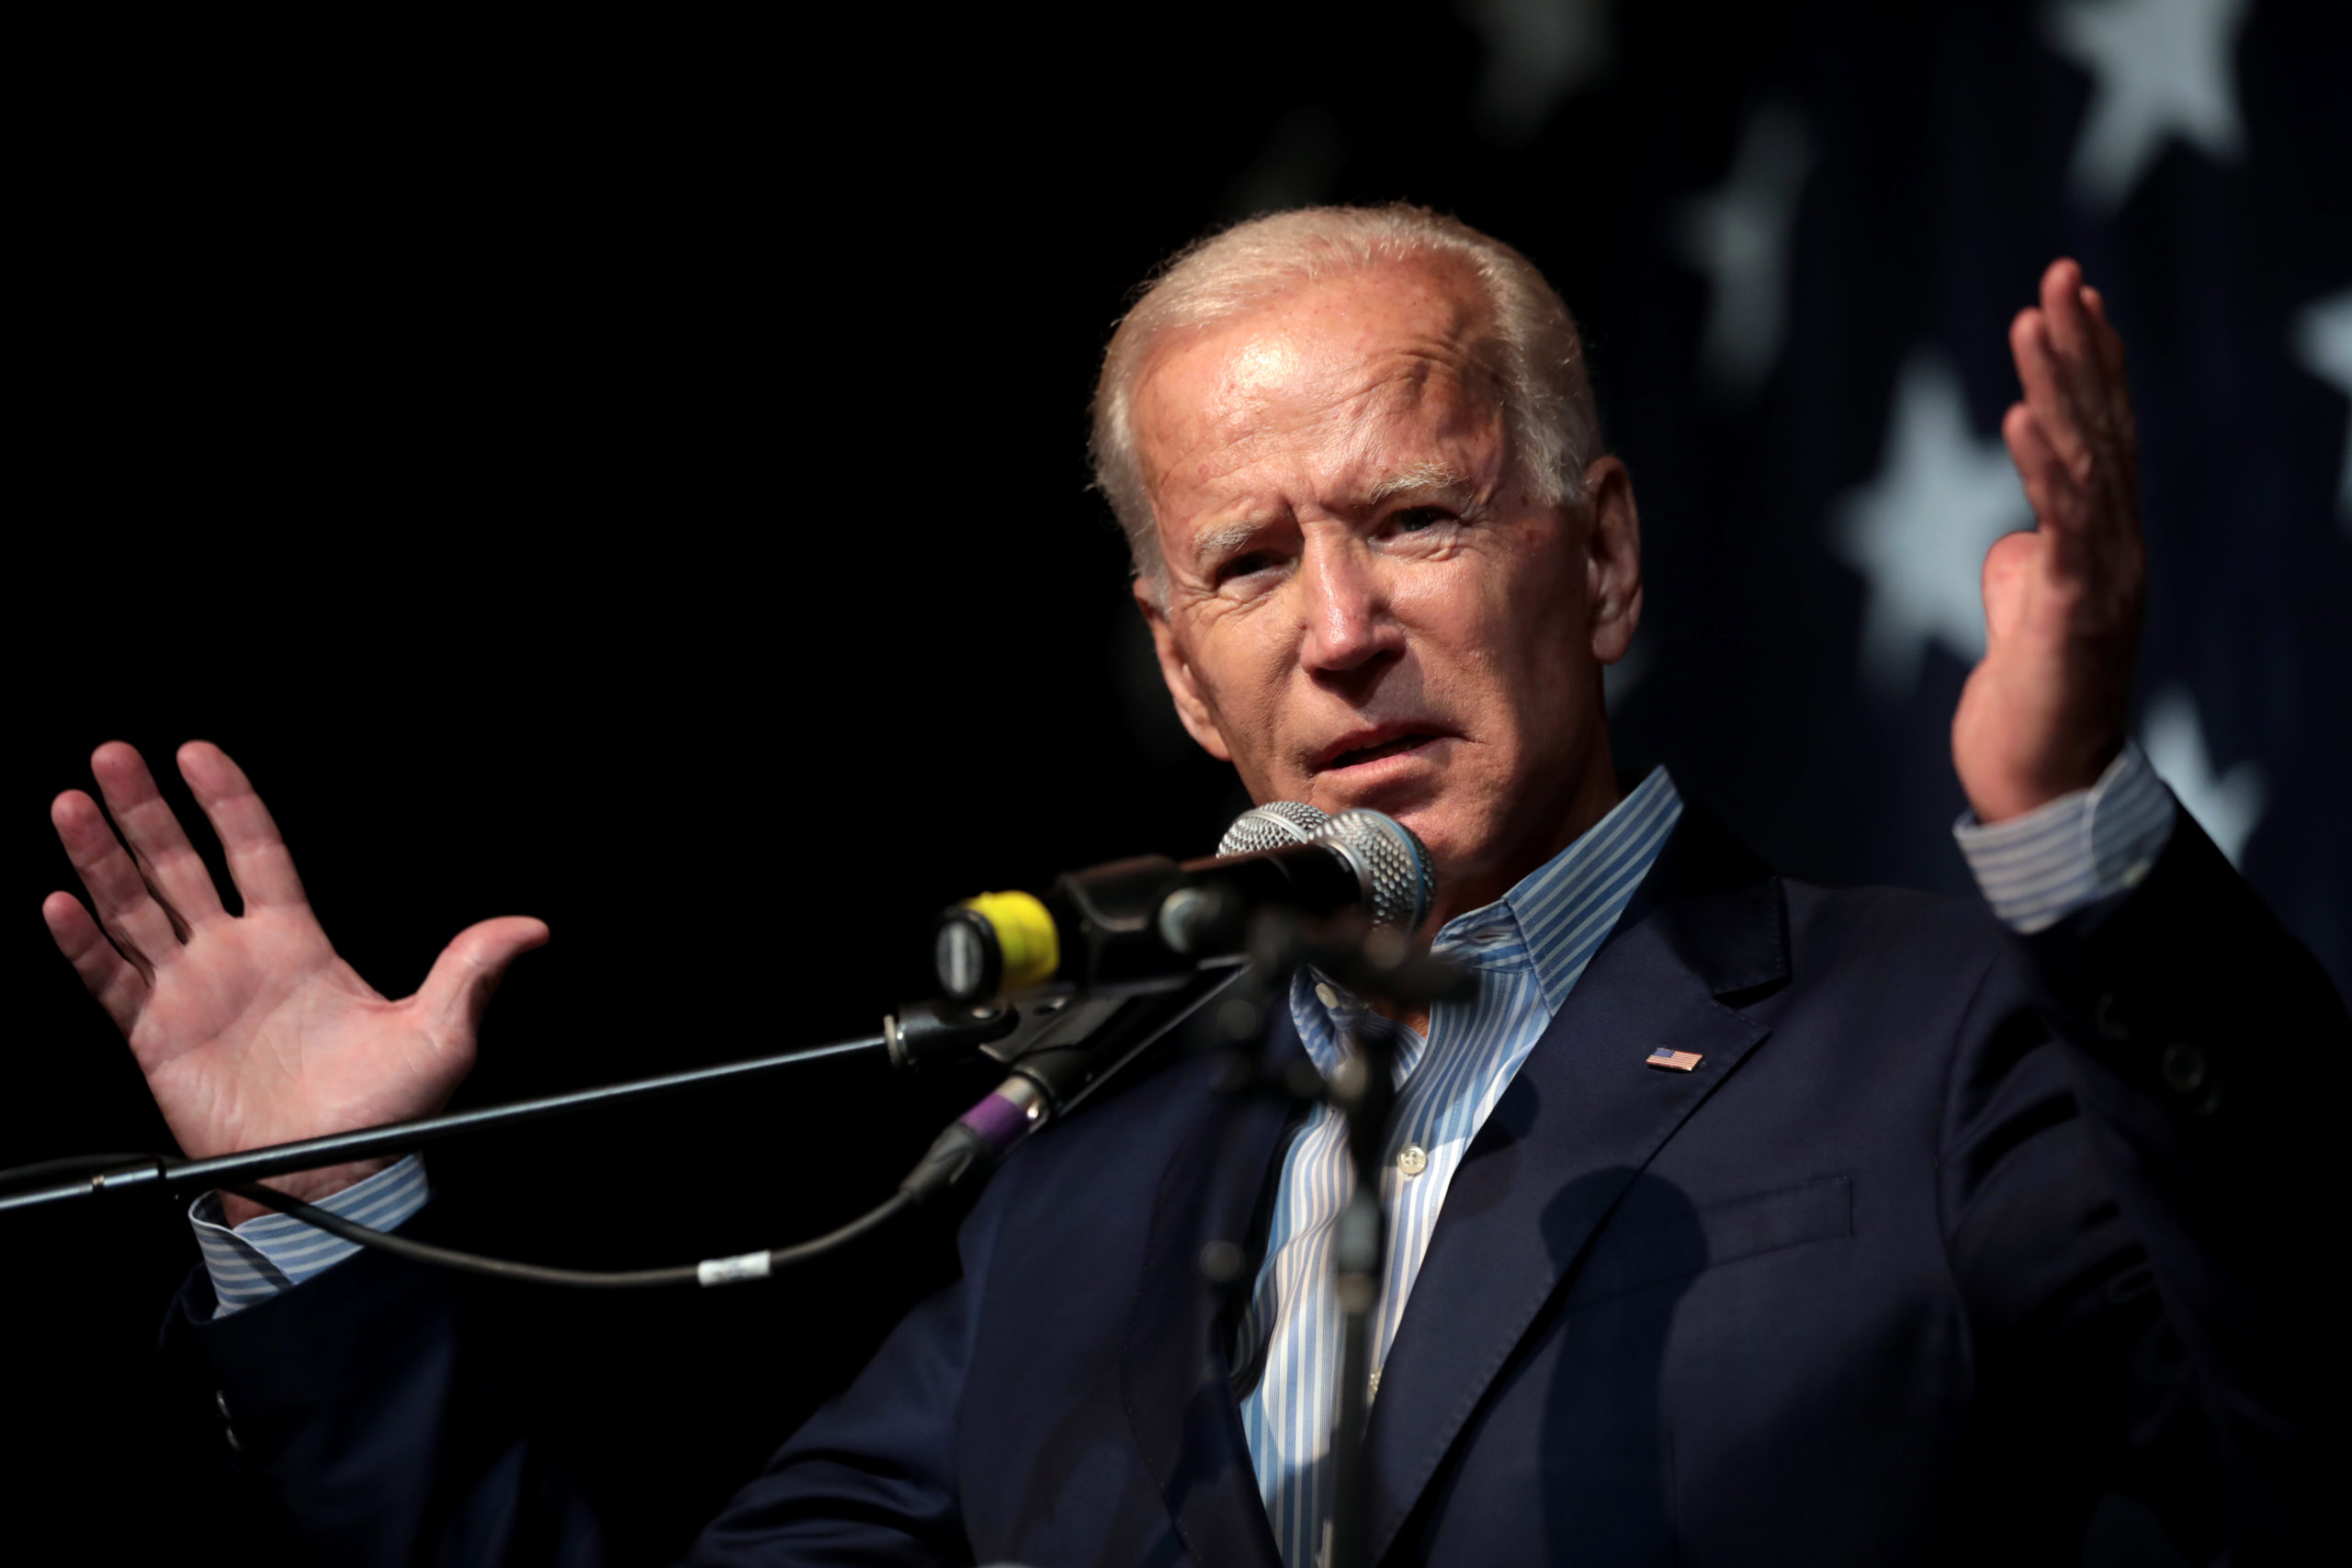 Biden to End US Support for Military Offensive in Yemen Civil War